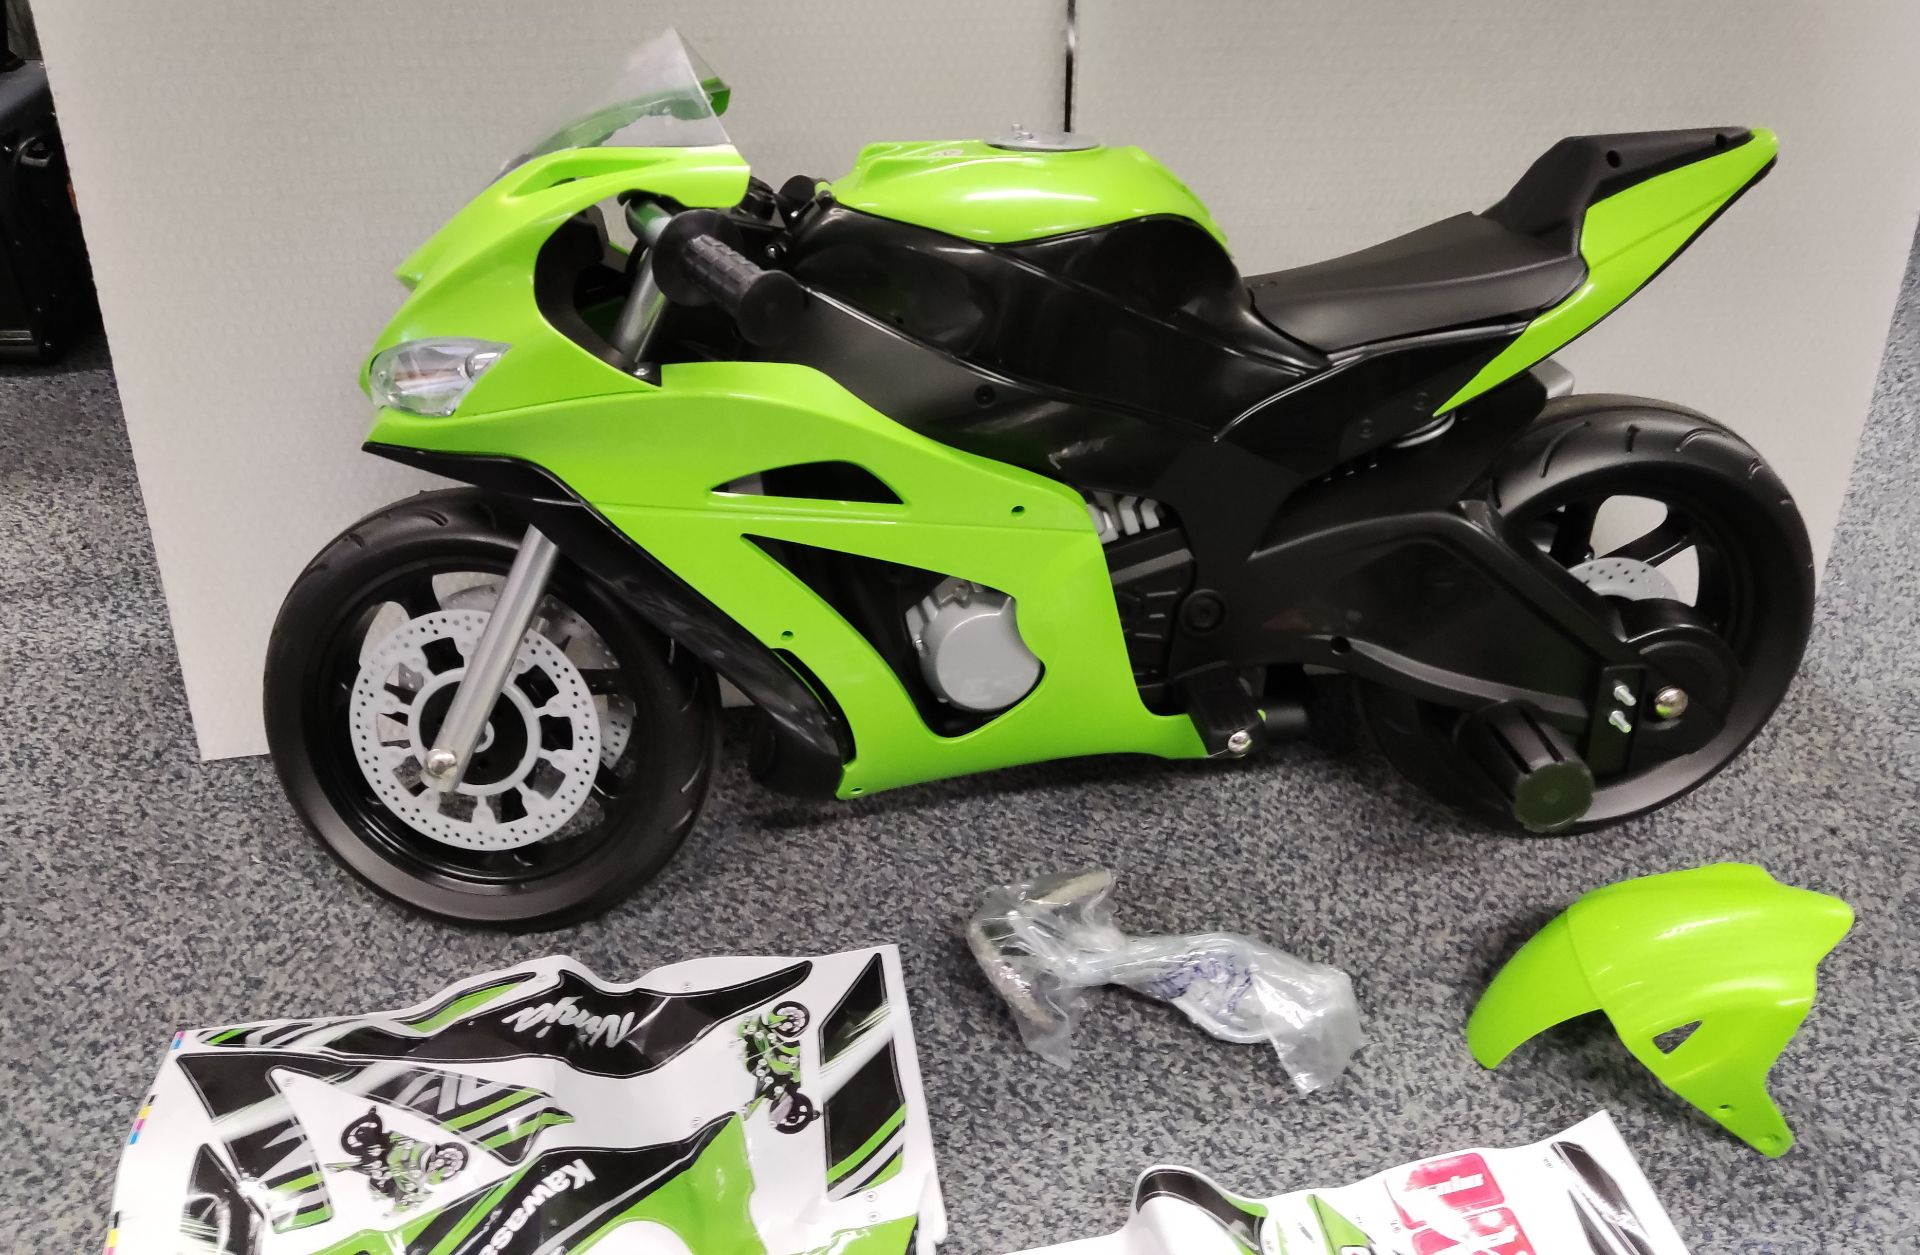 1 x Injusa Kids Electric Ride On Kawasaki ZX10 12V Motorcycle - 6495 - HTYS174 - CL987 - Location: - Image 8 of 24